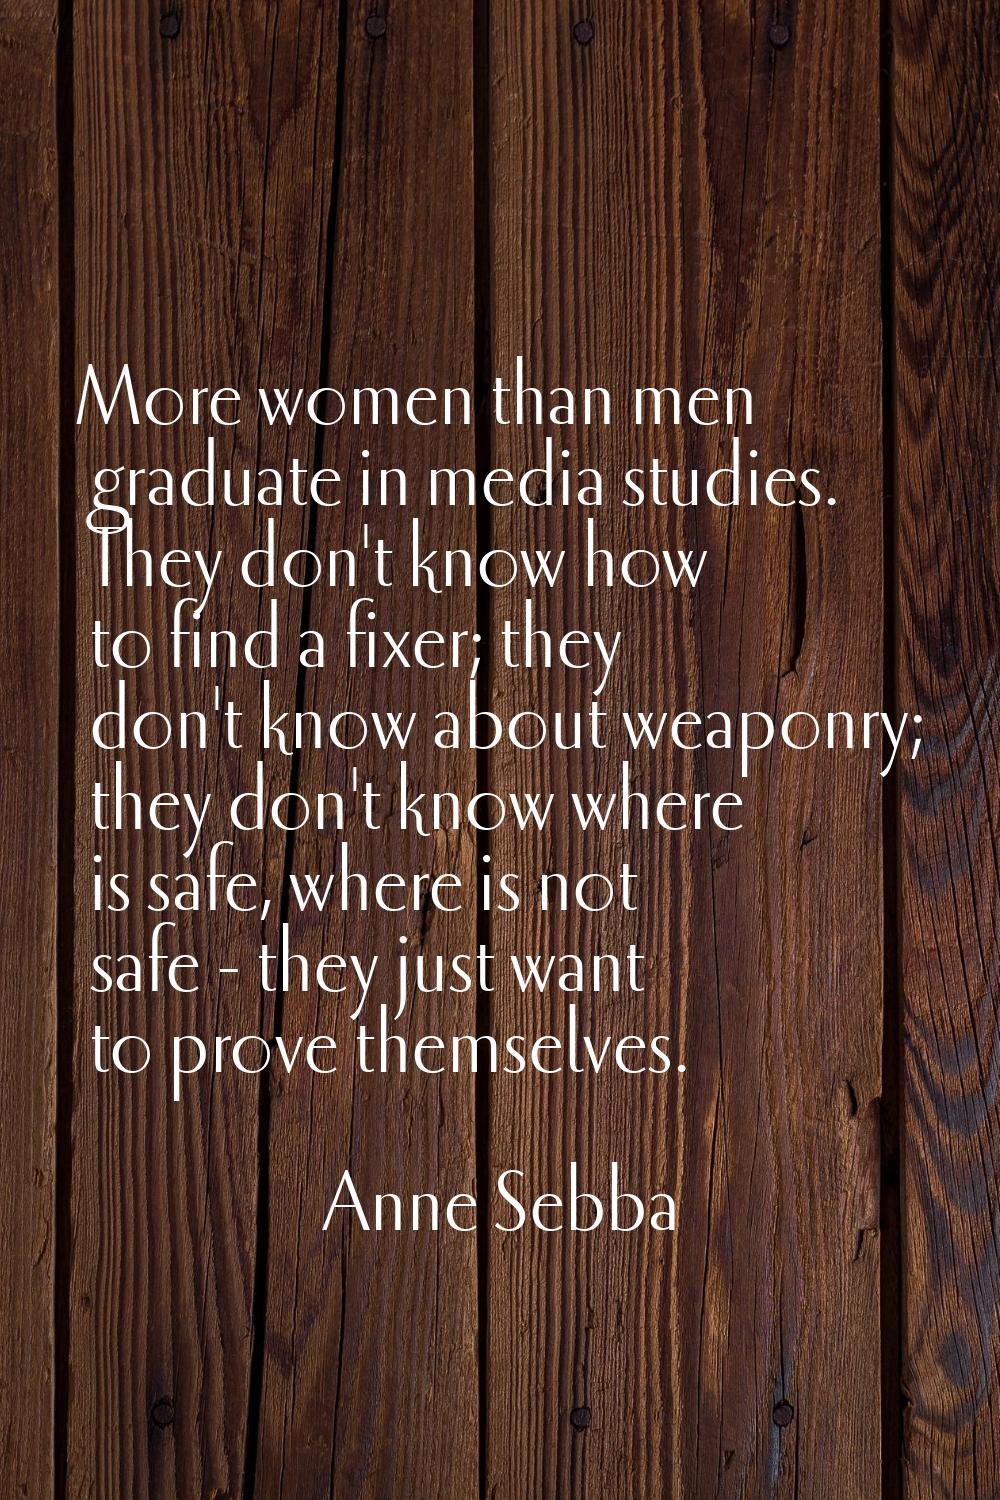 More women than men graduate in media studies. They don't know how to find a fixer; they don't know